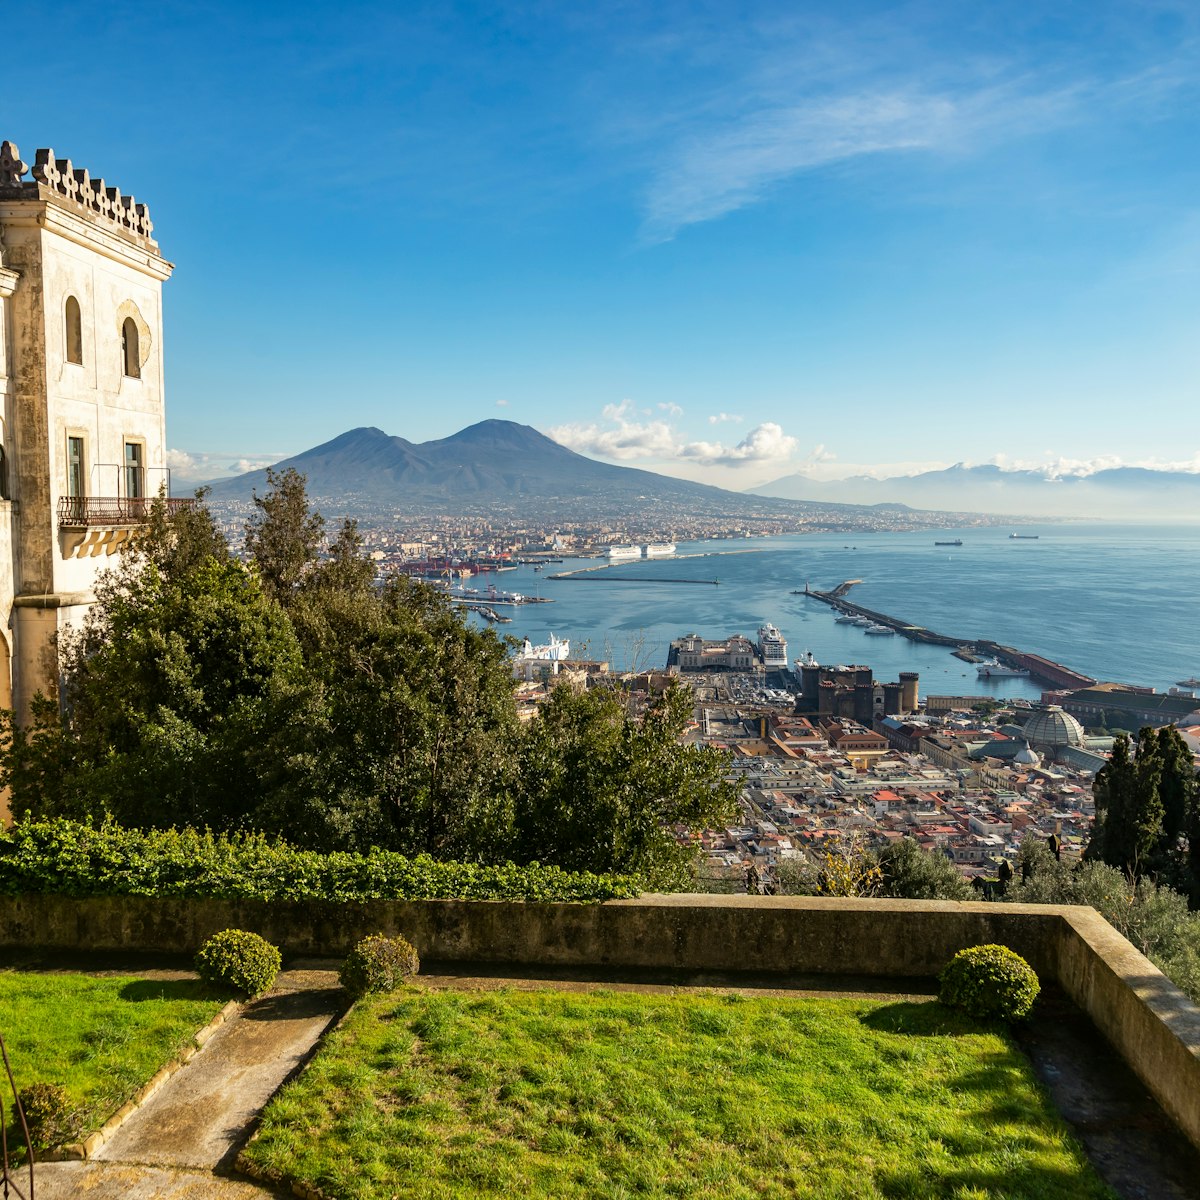 Scenic picture view of the city of Naples Napoli with famous Mount Vesuvius in the background from Certosa di San Martino monastery, Campania, Italy; Shutterstock ID 2105276987; purchase_order: 65050; job: poi; client: ; other:
2105276987